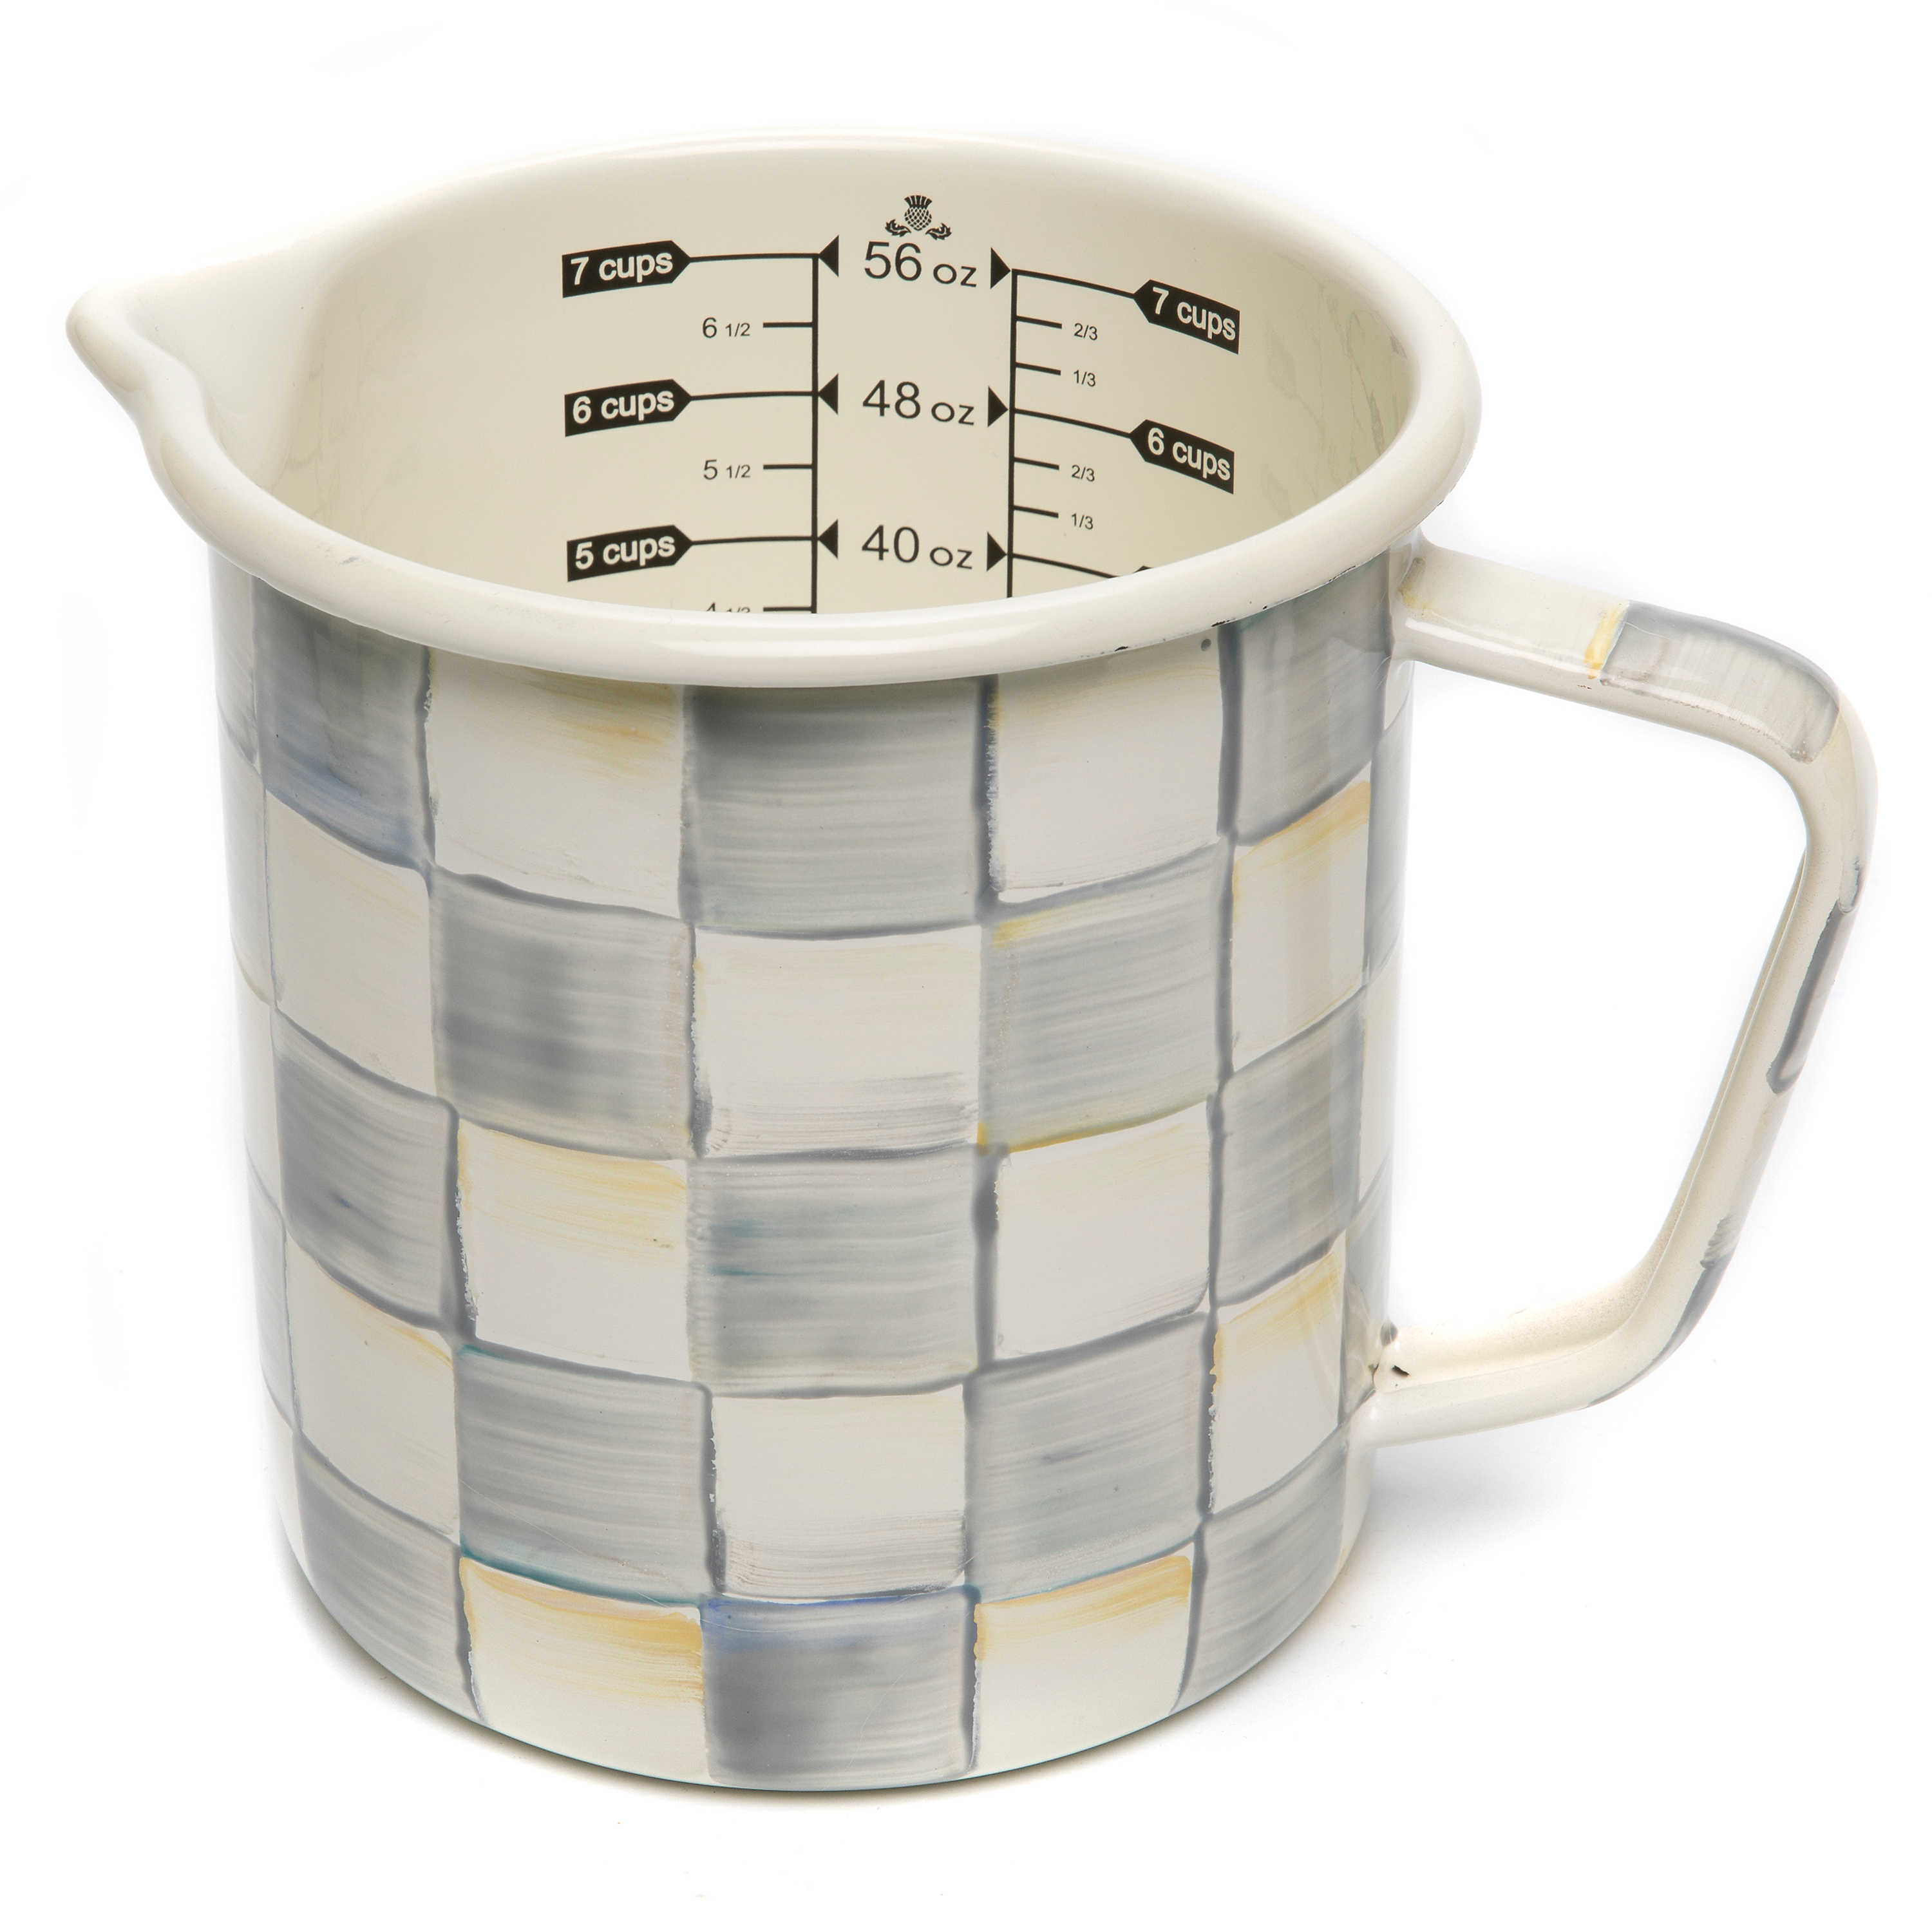 Sterling Check 7 Cup Measuring Cup mackenzie-childs Panama 0